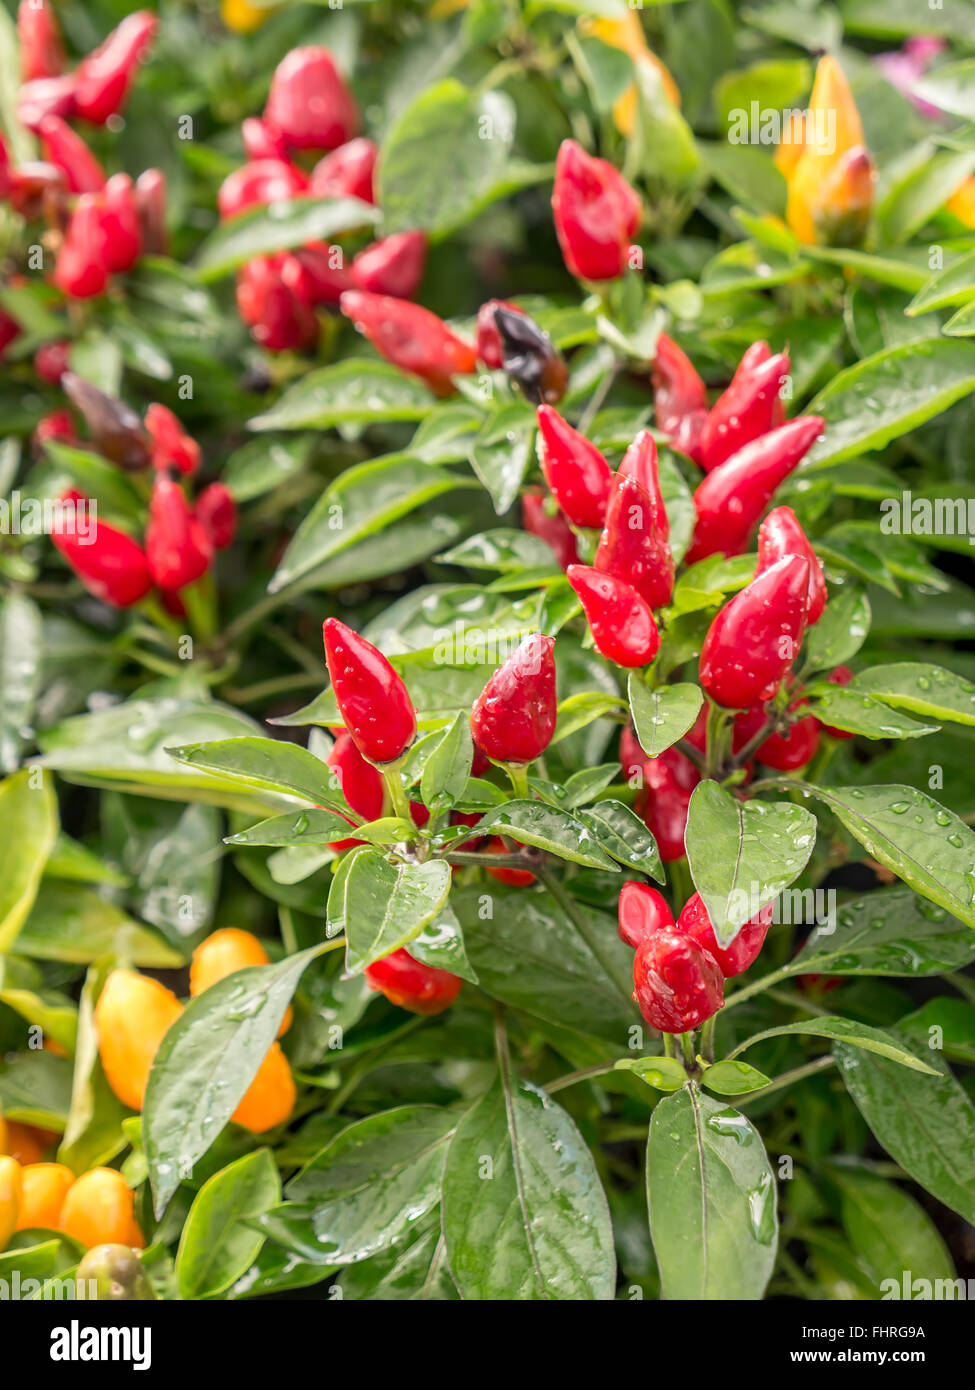 Cultivated yellow and red pepper growing on shrub Stock Photo